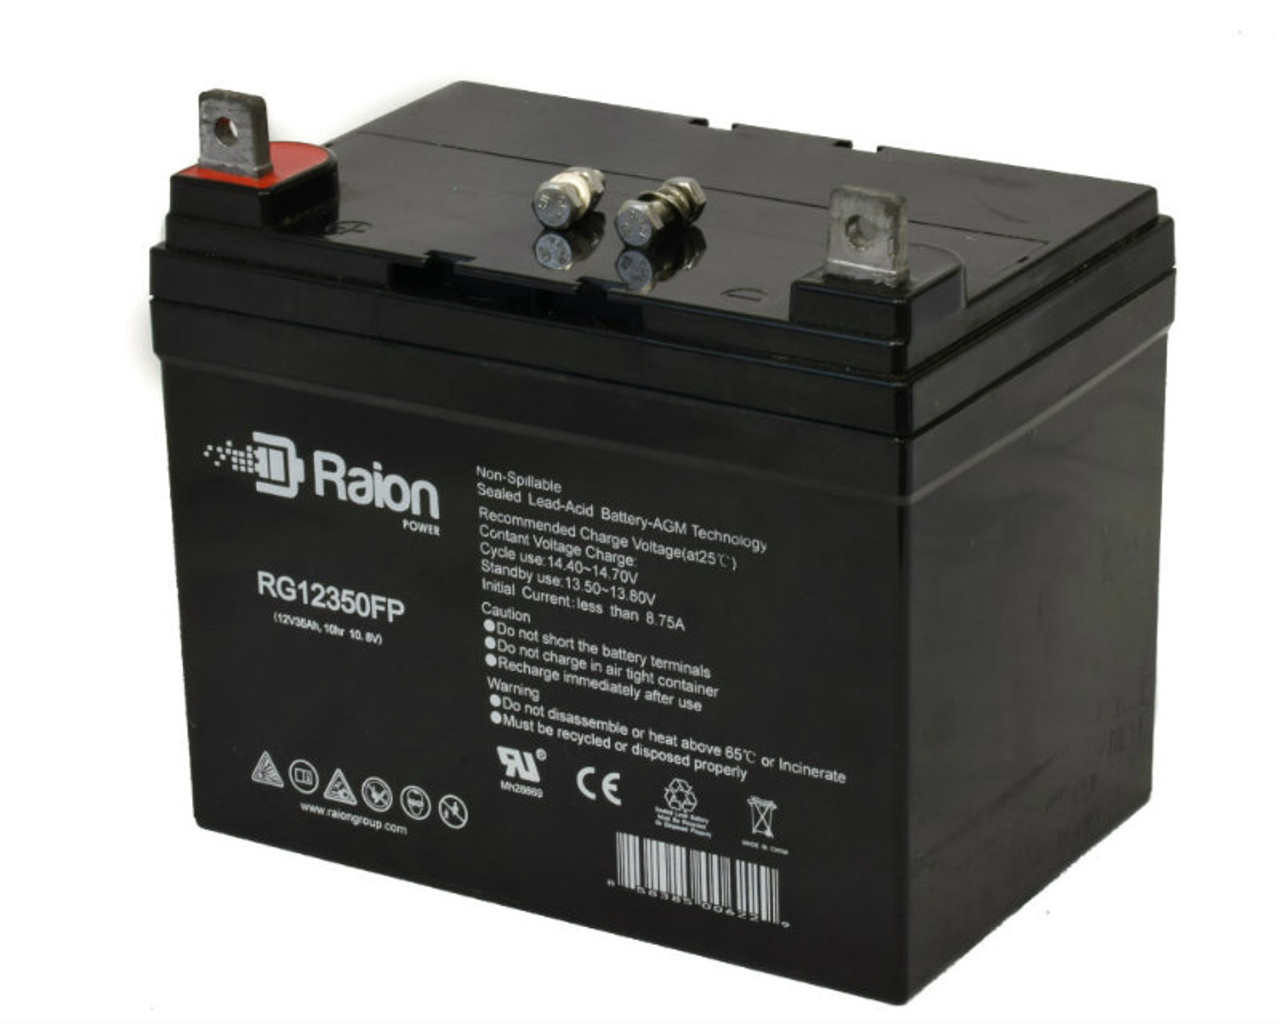 Raion Power Replacement 12V 35Ah RG12350FP Battery for Saft SP1228